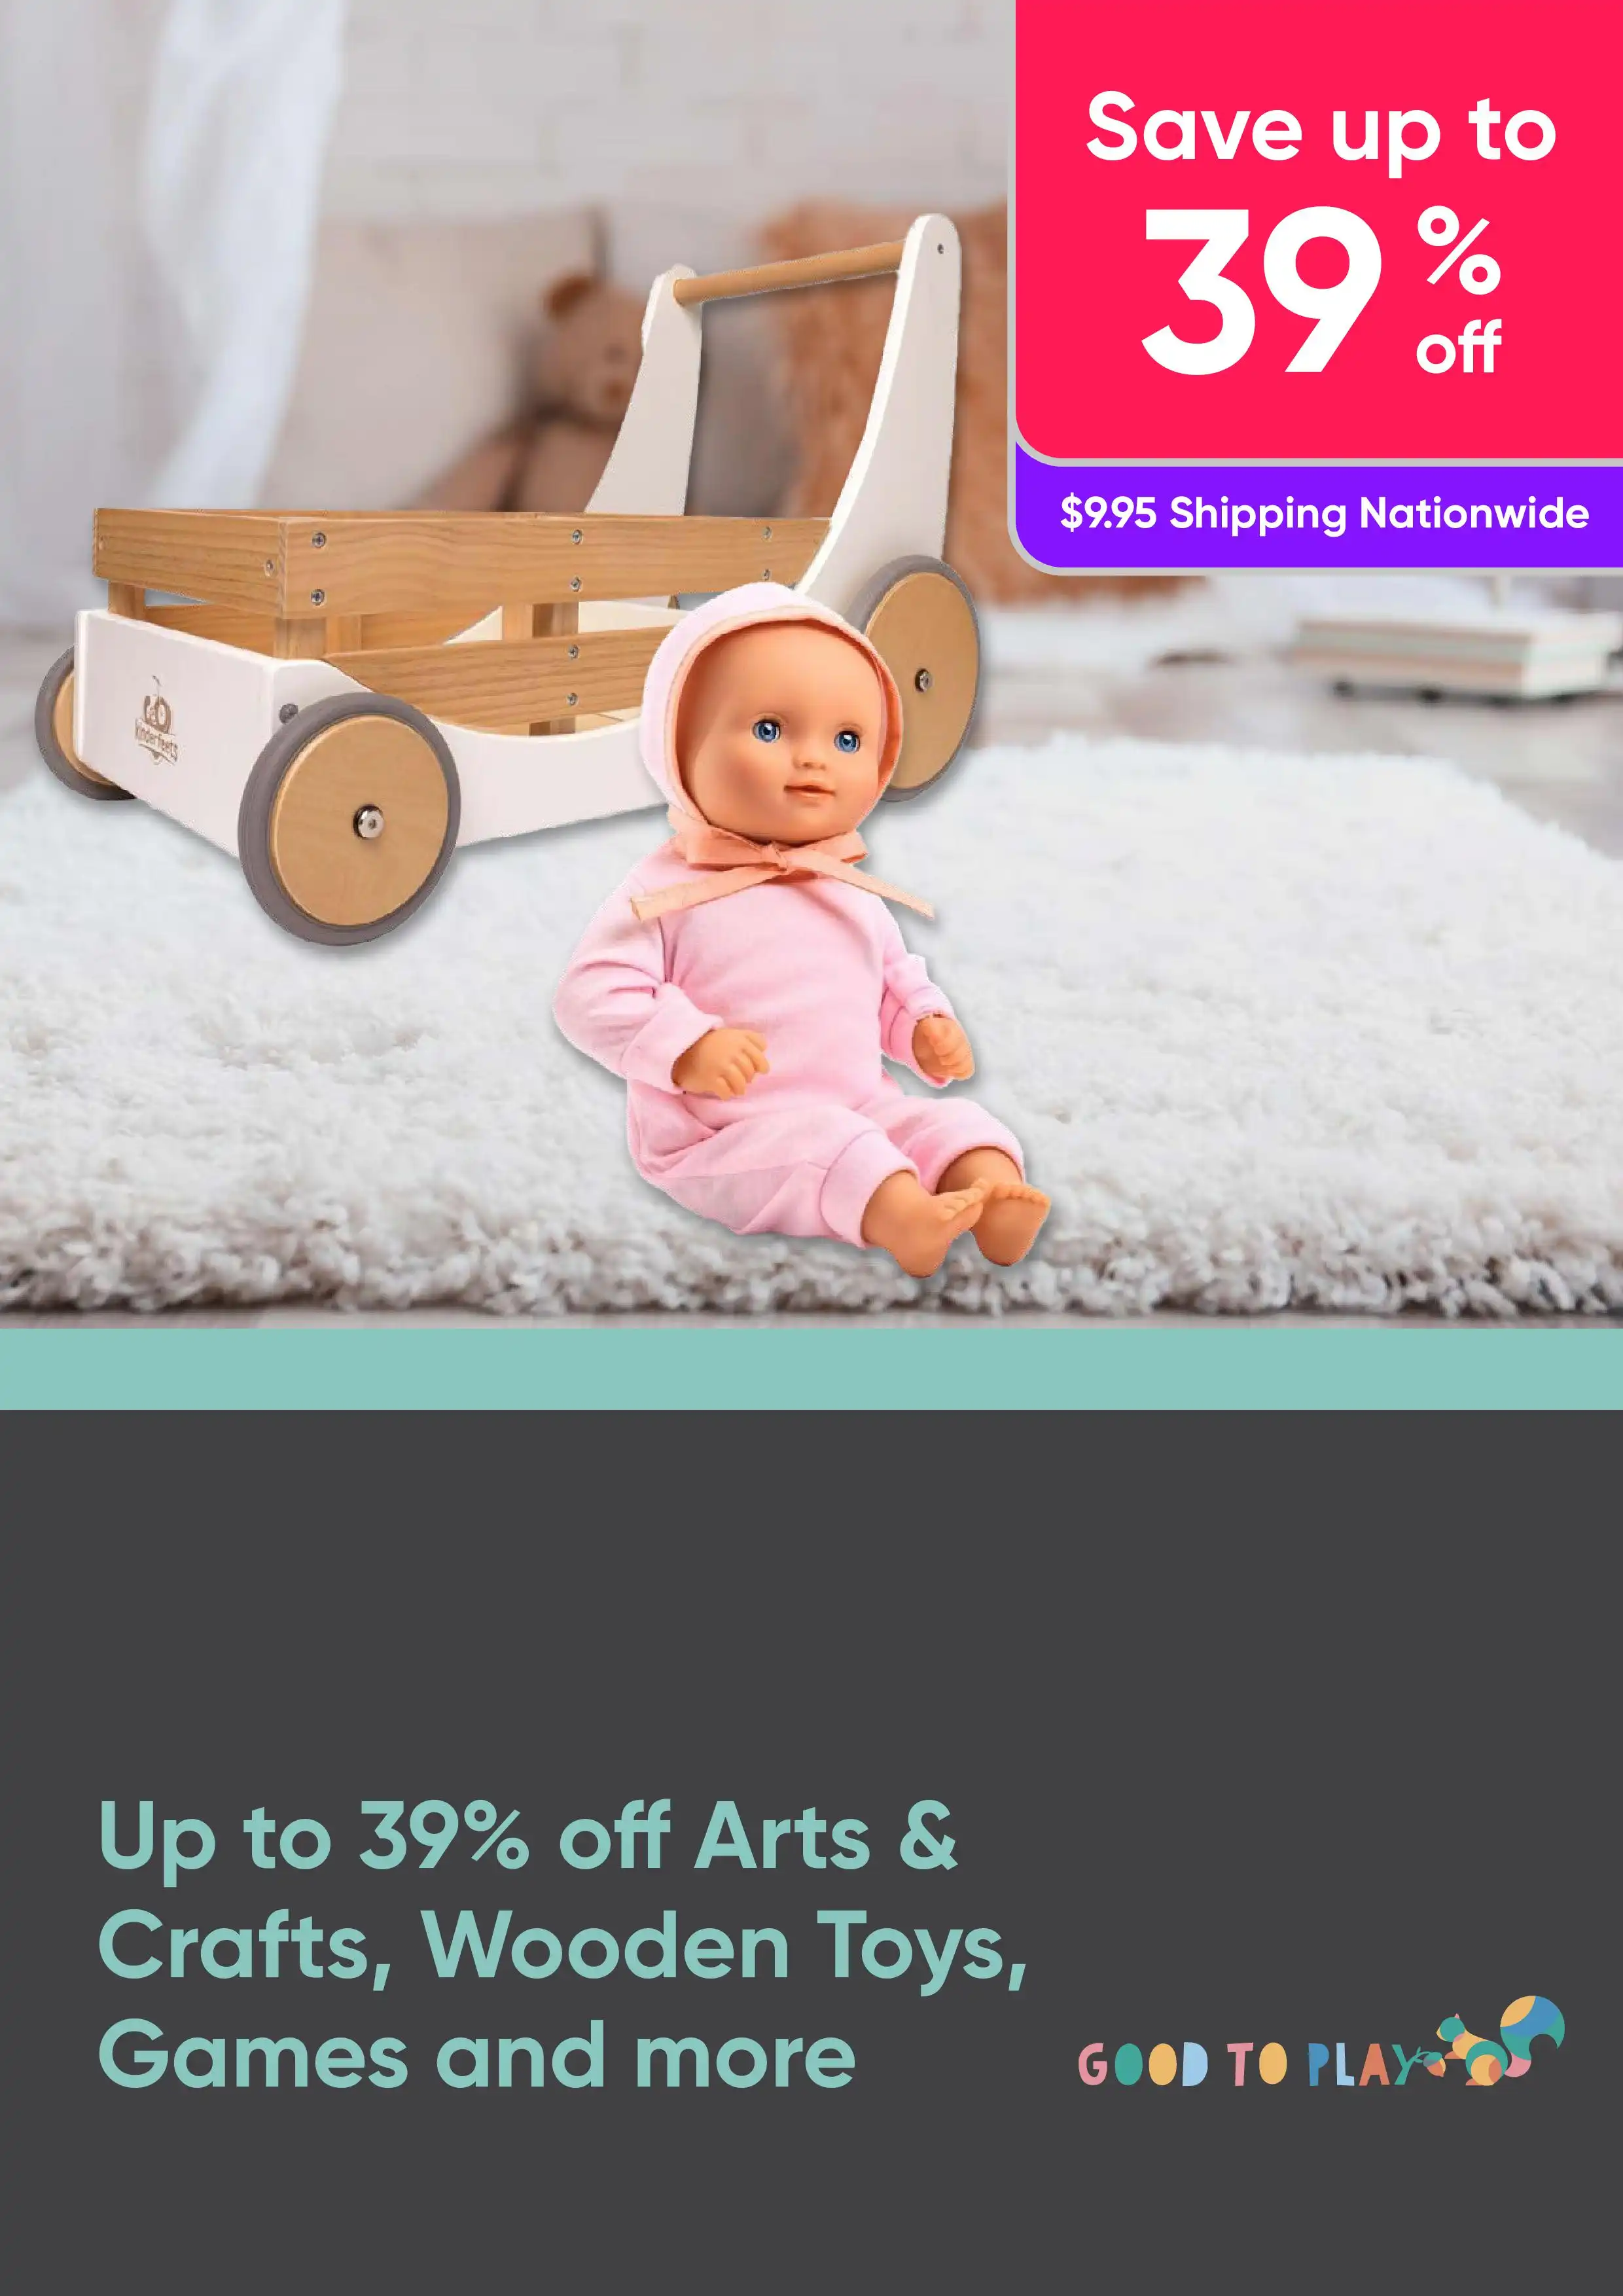 Up to 39% off Arts & Crafts, Wooden Toys, Games and more